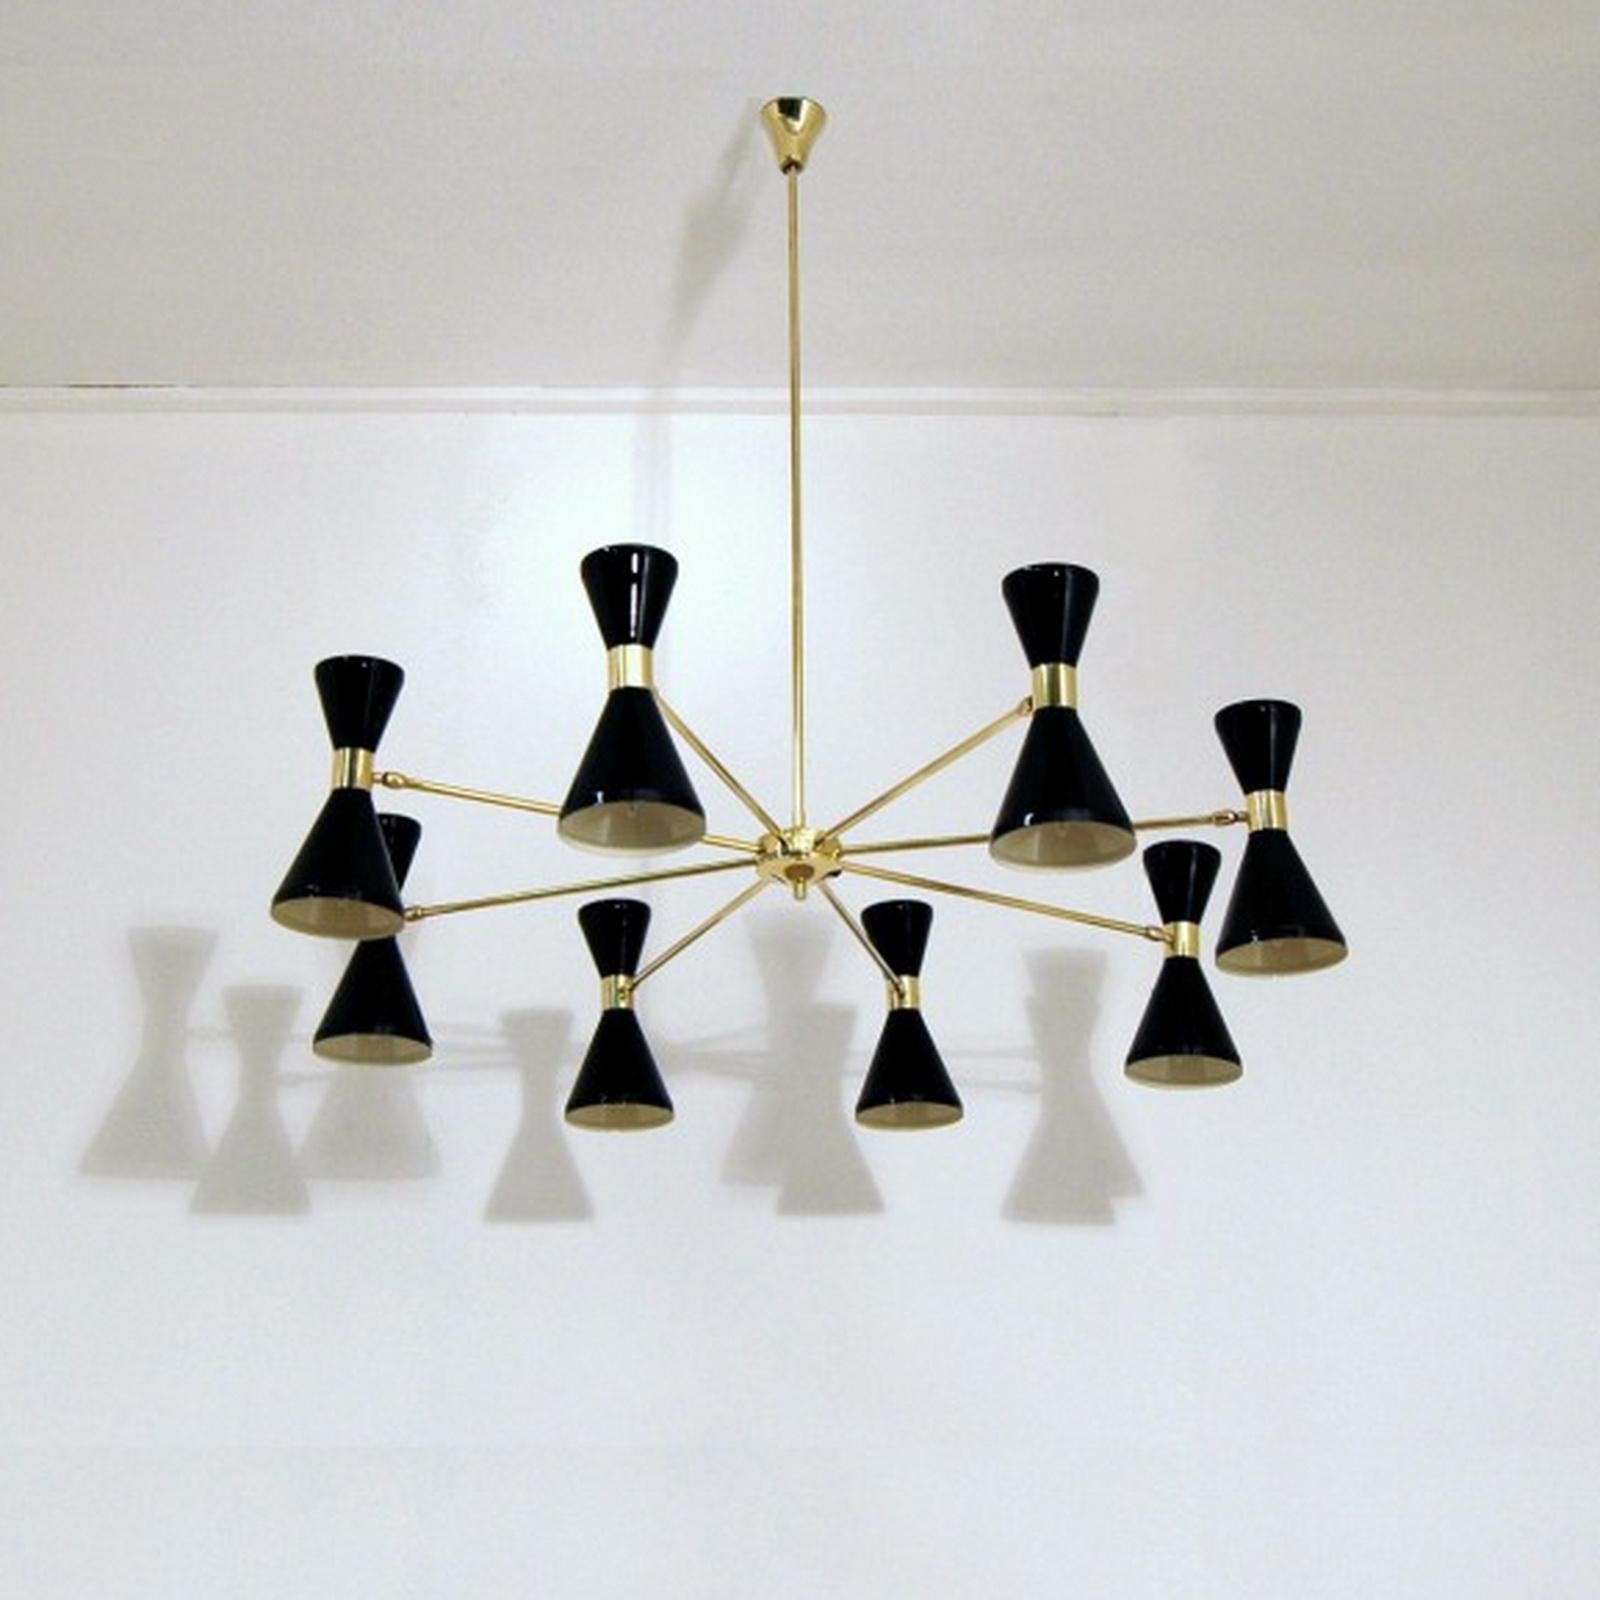 Eight arms brass chandelier, pivot shades, Stilnovo style.
Light up and down, pivoting shades to adjust the light distribution in the room. Customizable in colors and dimensions. 
Dimensions:
Diameter 140 cm, height 100cm.